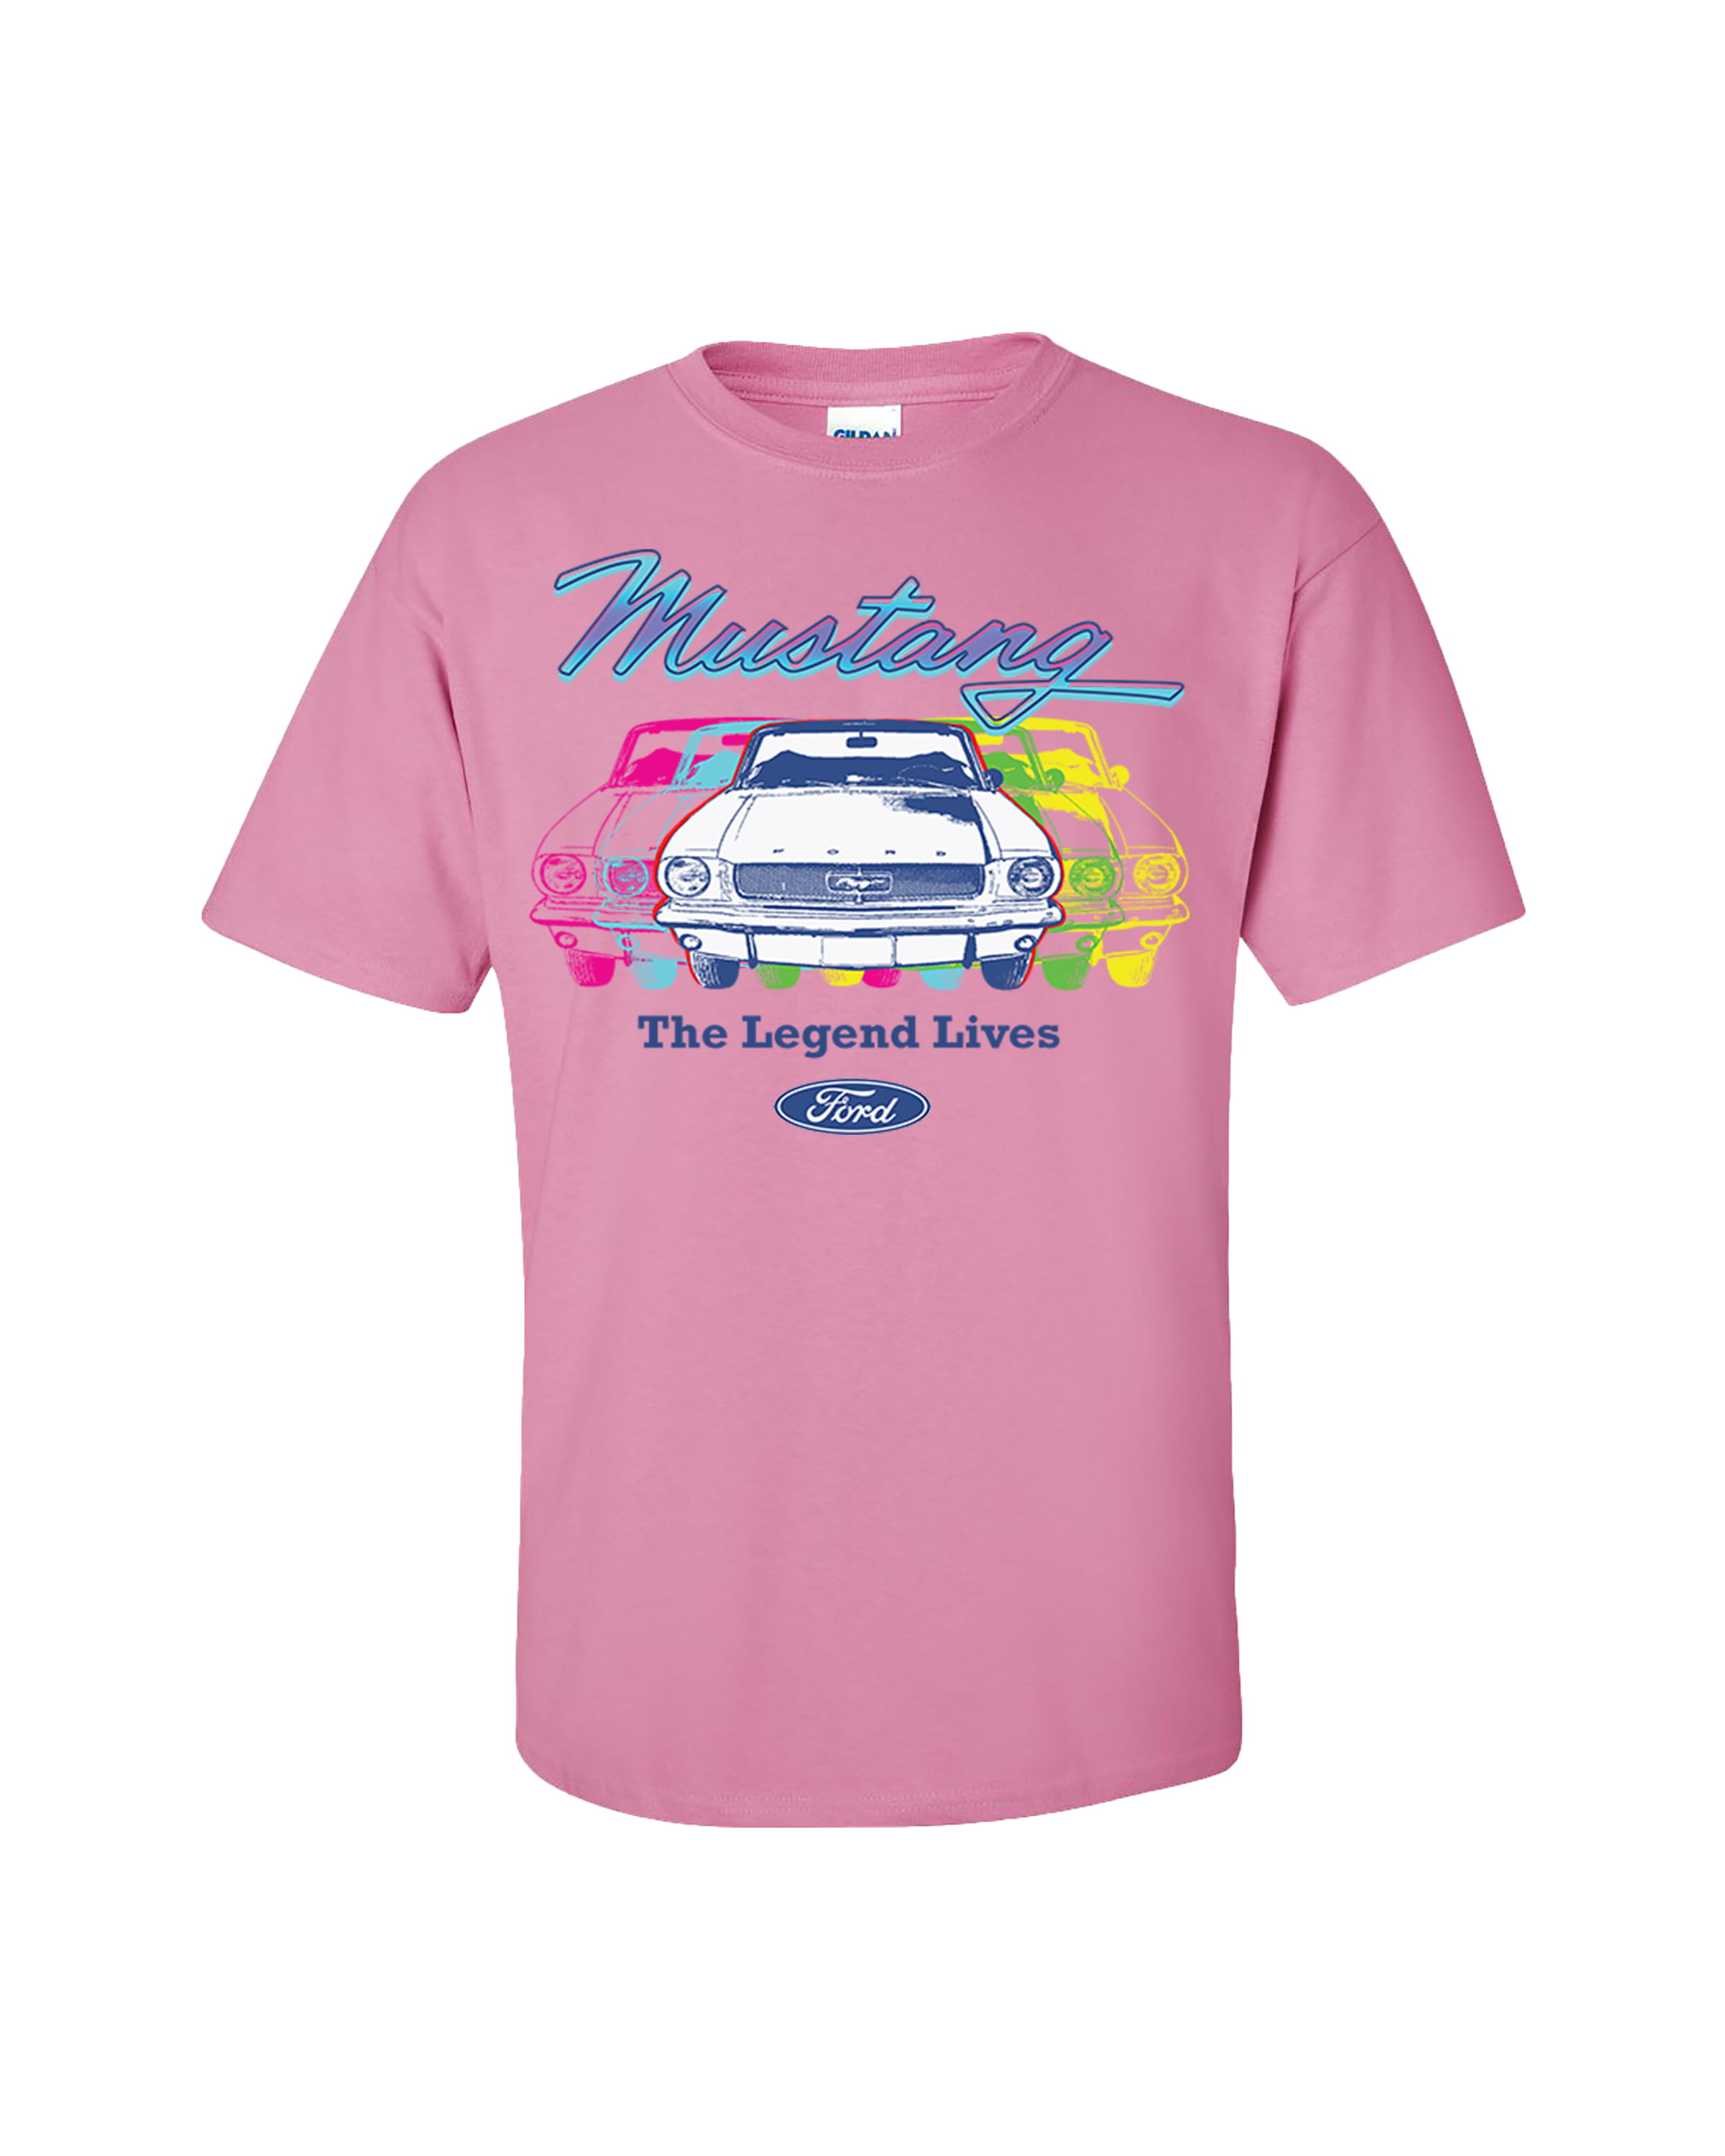 Ford Mustang The Legend Lives Retro Graphic Short Sleeve T-shirt-Pink-xxxl